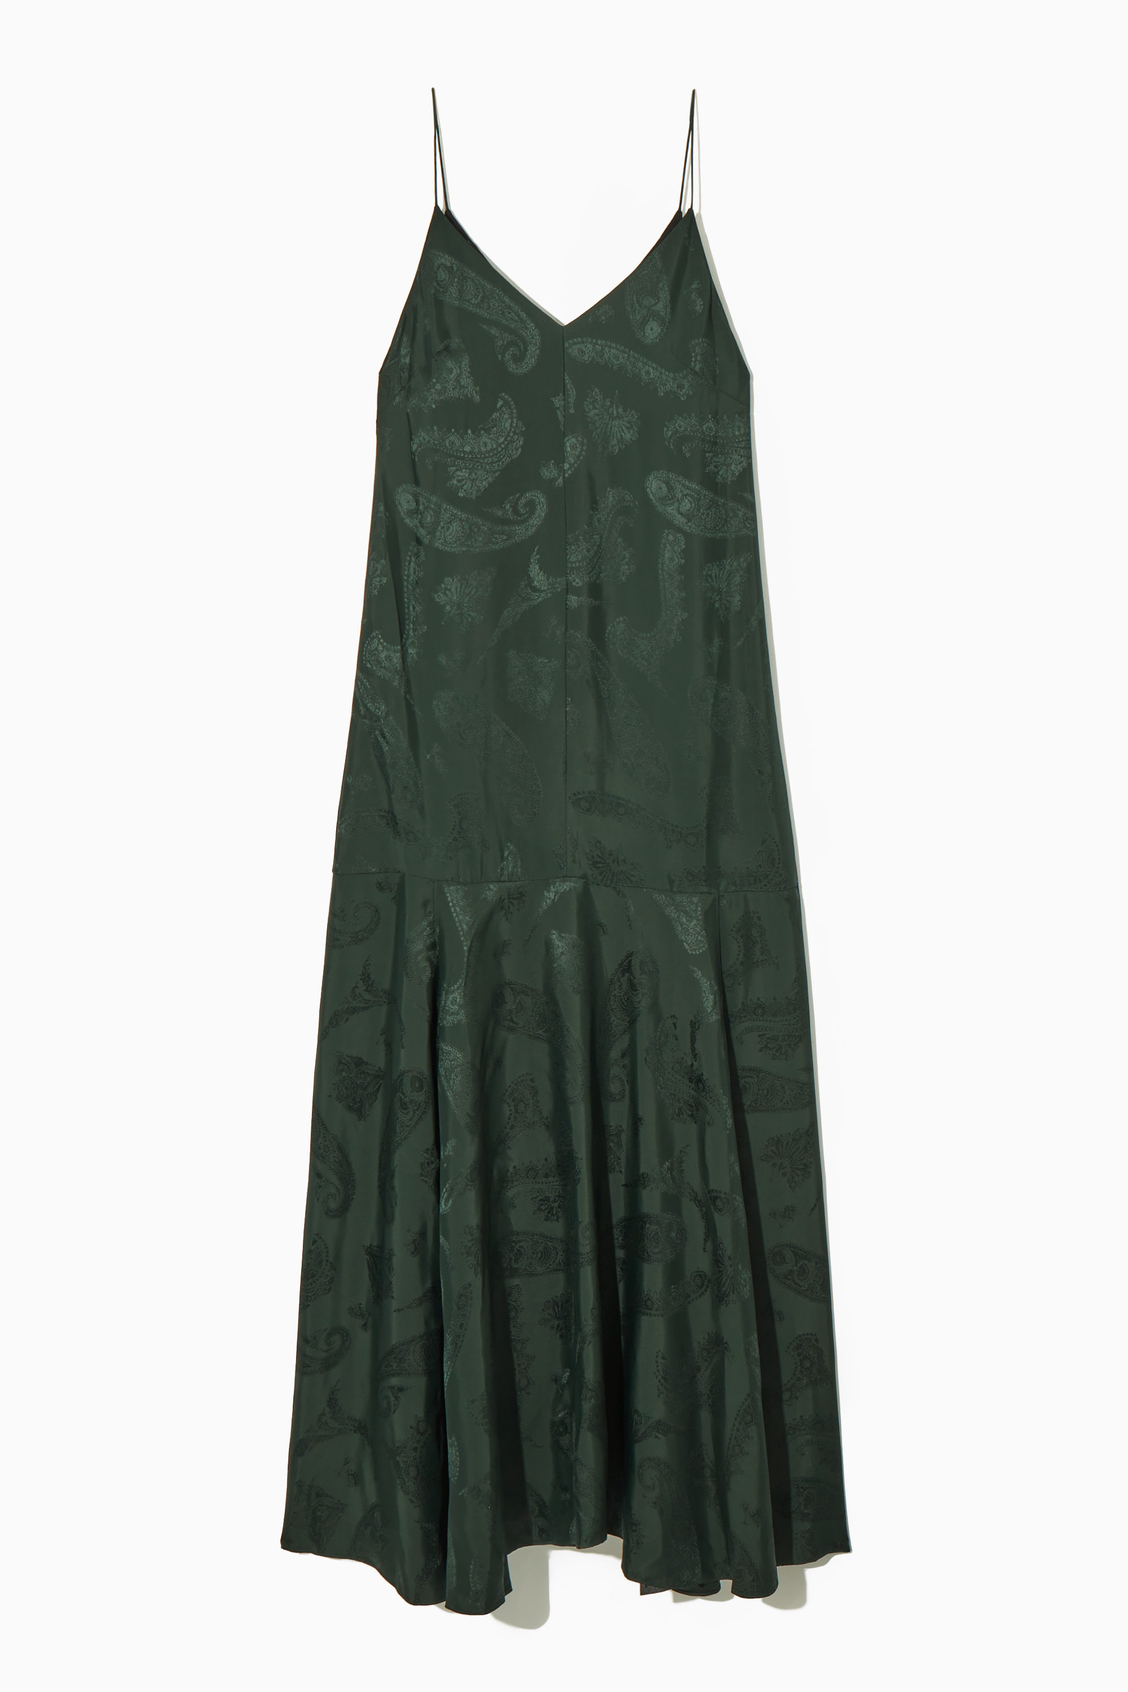 COS green gathered-neck wool dress